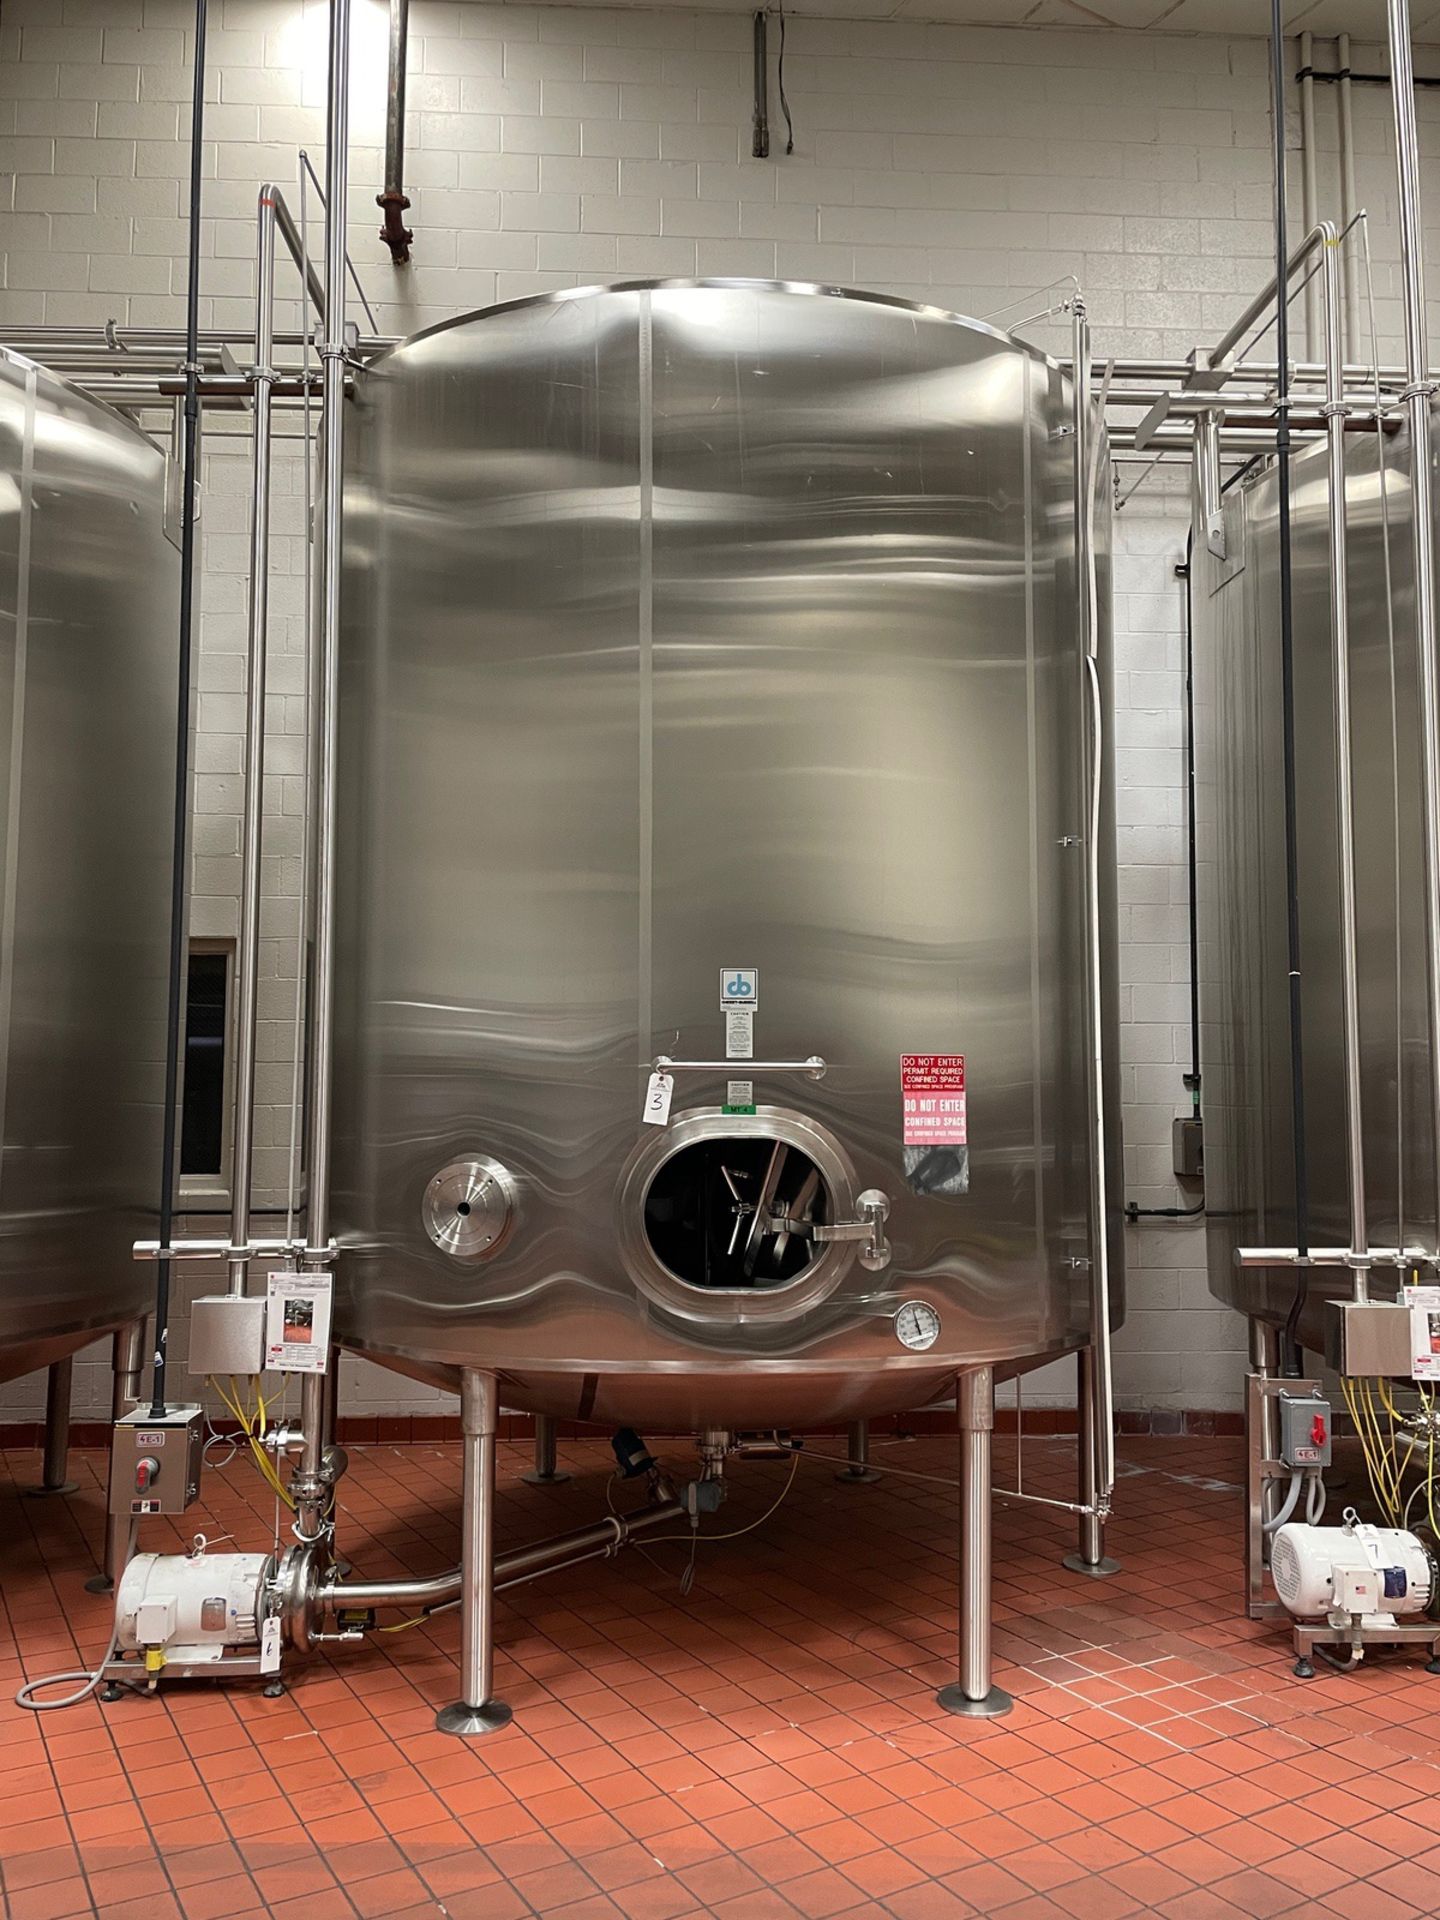 Cherry Burrell 5,000 Gallon Stainless Steel Double Wall Insulated Tank with Vertica | Rig Fee: $3500